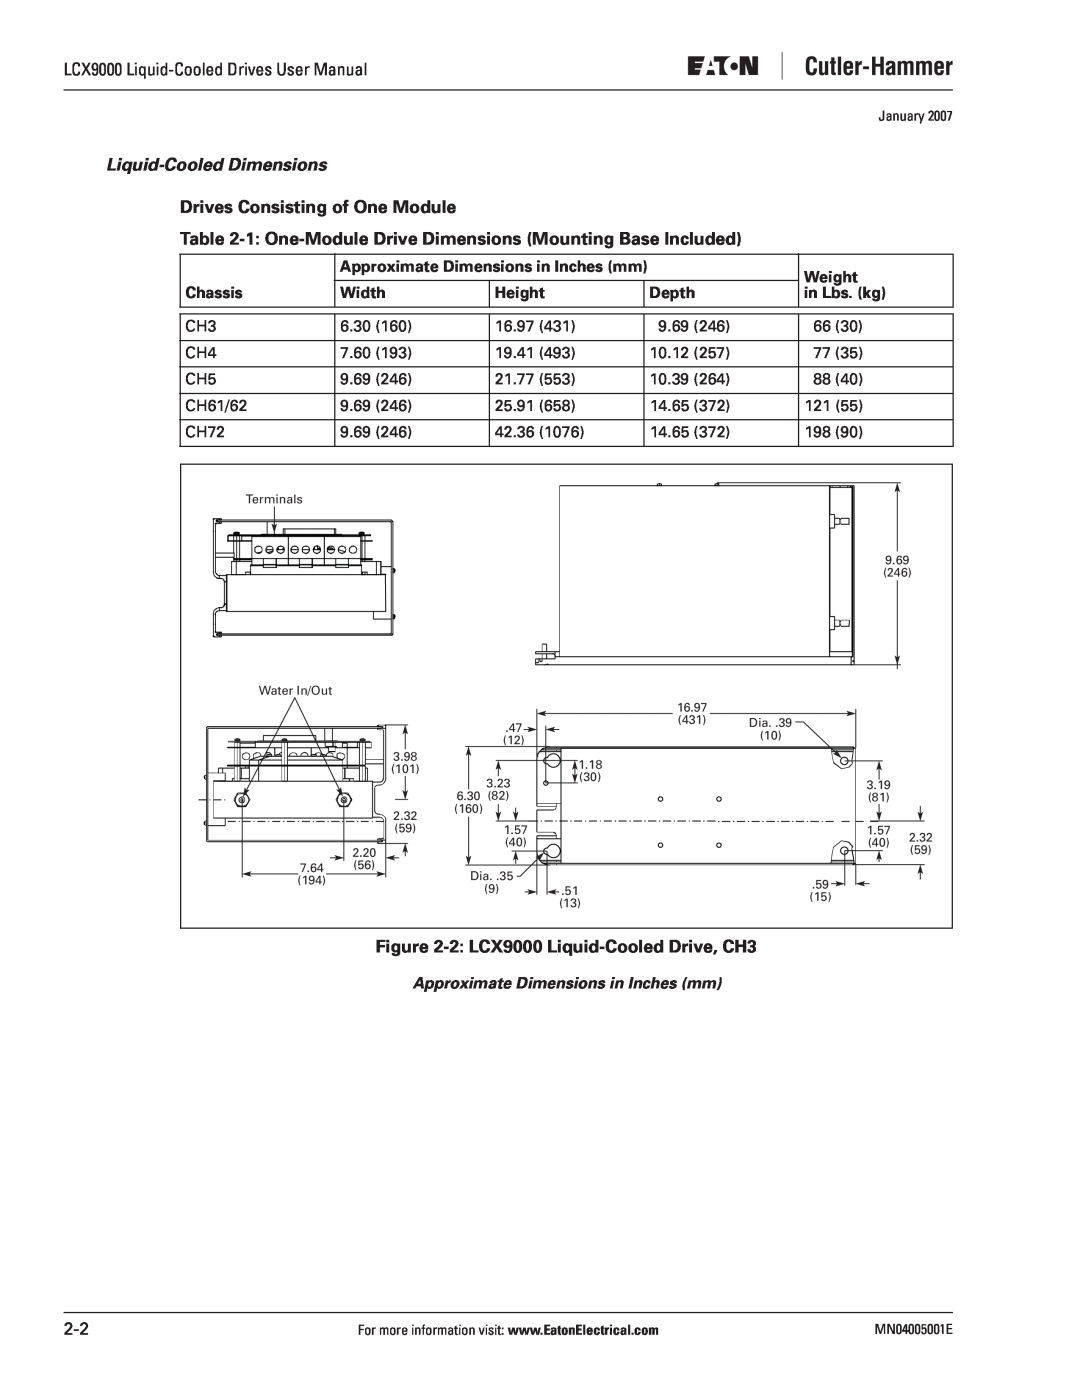 J. T. Eaton user manual Liquid-Cooled Dimensions, Drives Consisting of One Module, 2 LCX9000 Liquid-Cooled Drive, CH3 